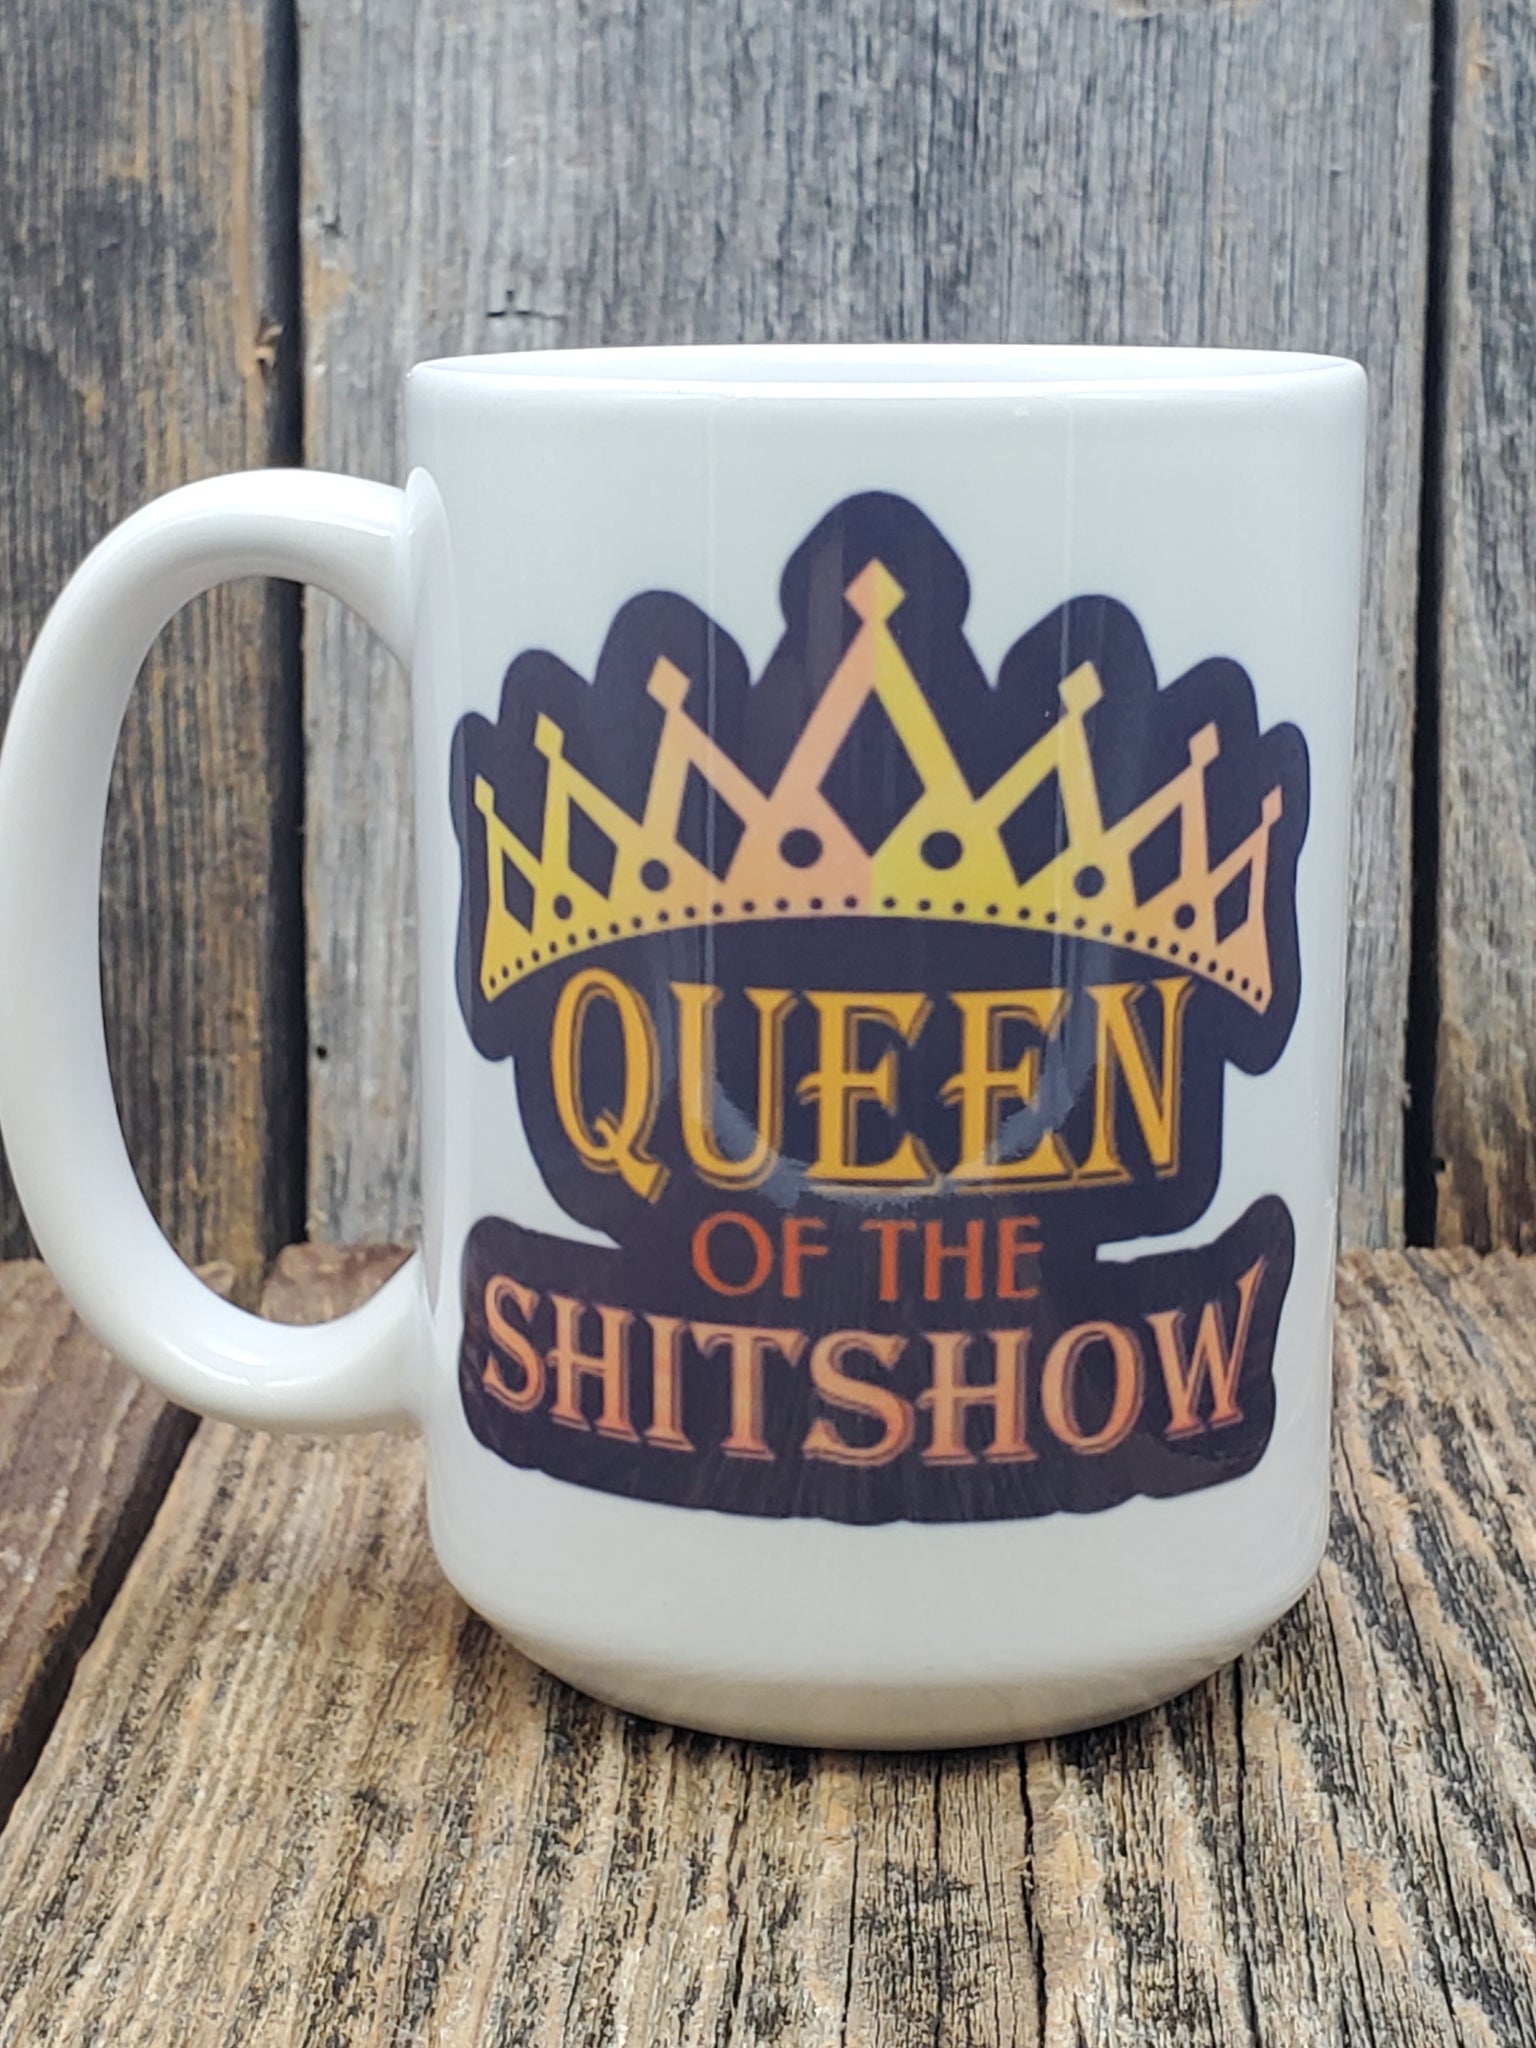 Queen of the Shitshow